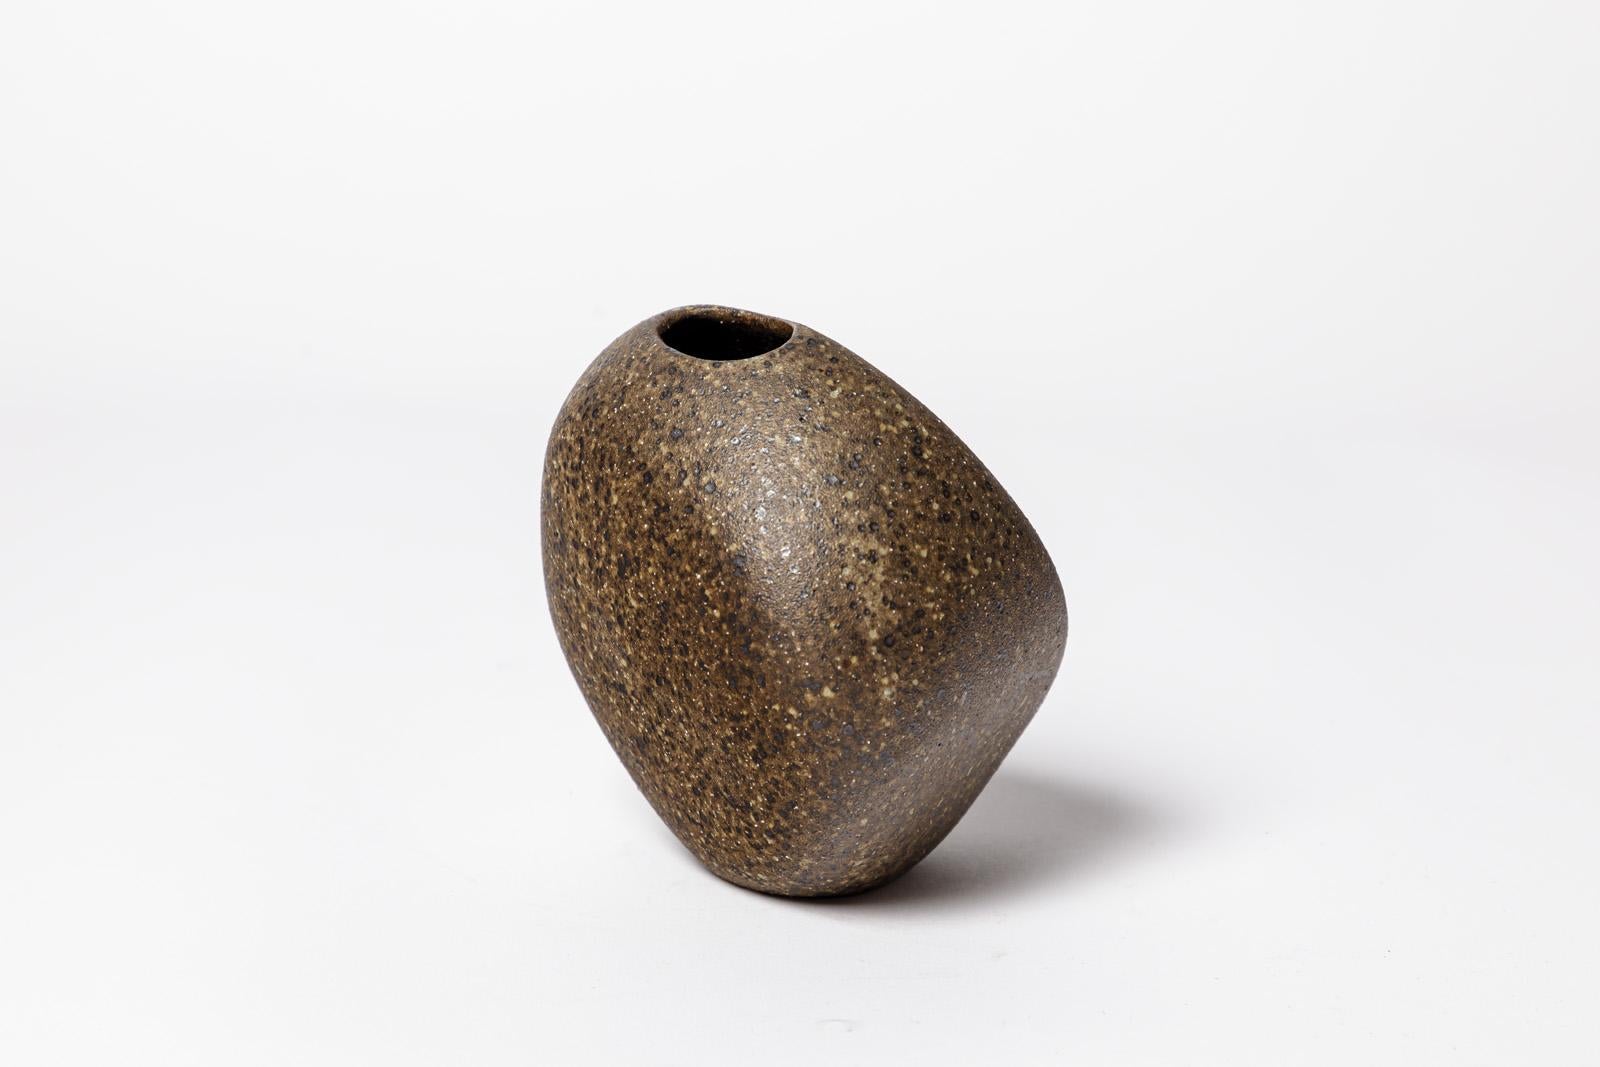 Tim Orr

Abstract ceramic free form

Brown stoneware ceramic vase

Original perfect condition

Signed under the base

Measures: Height 11 cm
Large 10 cm 
Depth 11 cm.